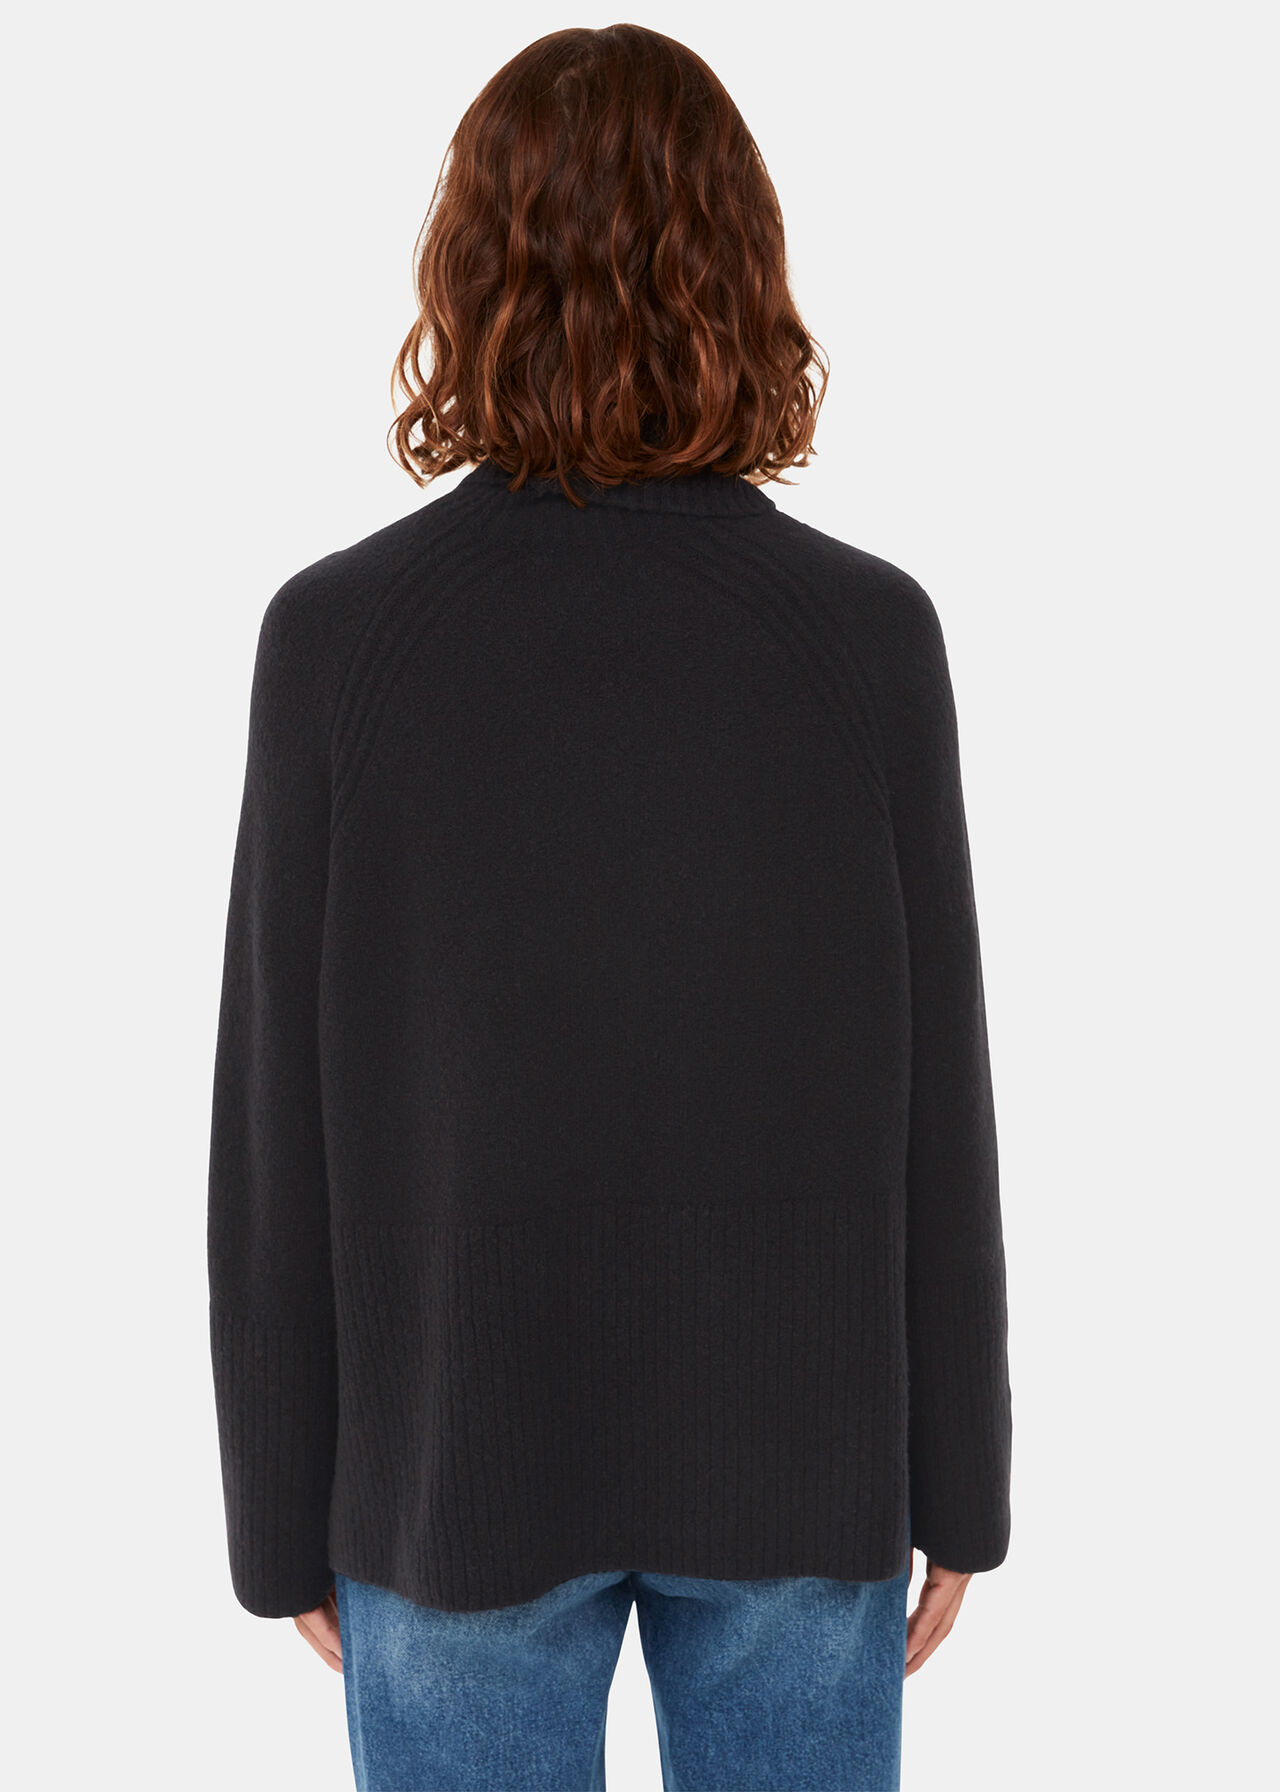 Shop the Black Ribbed Roll Neck Jumper at Whistles